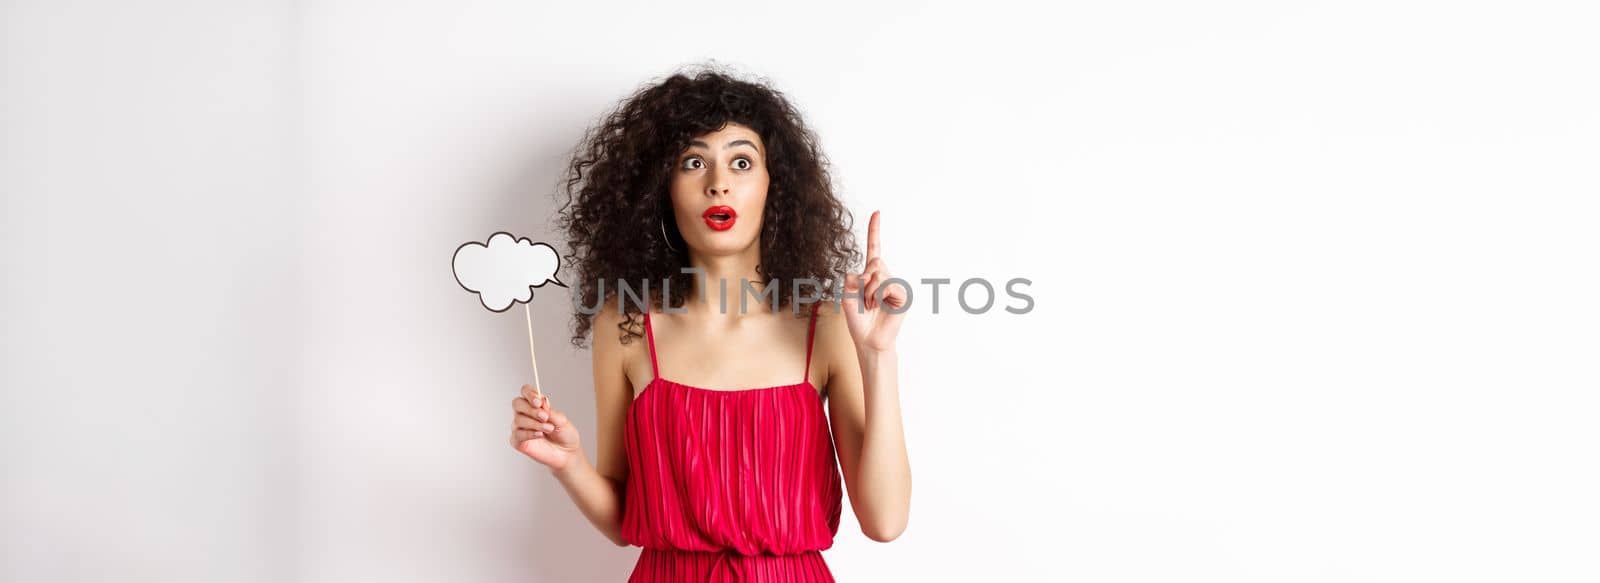 Excited fashionable woman in red dress pitching an idea, raising finger in eureka sign, holding thought cloud, standing on white background.